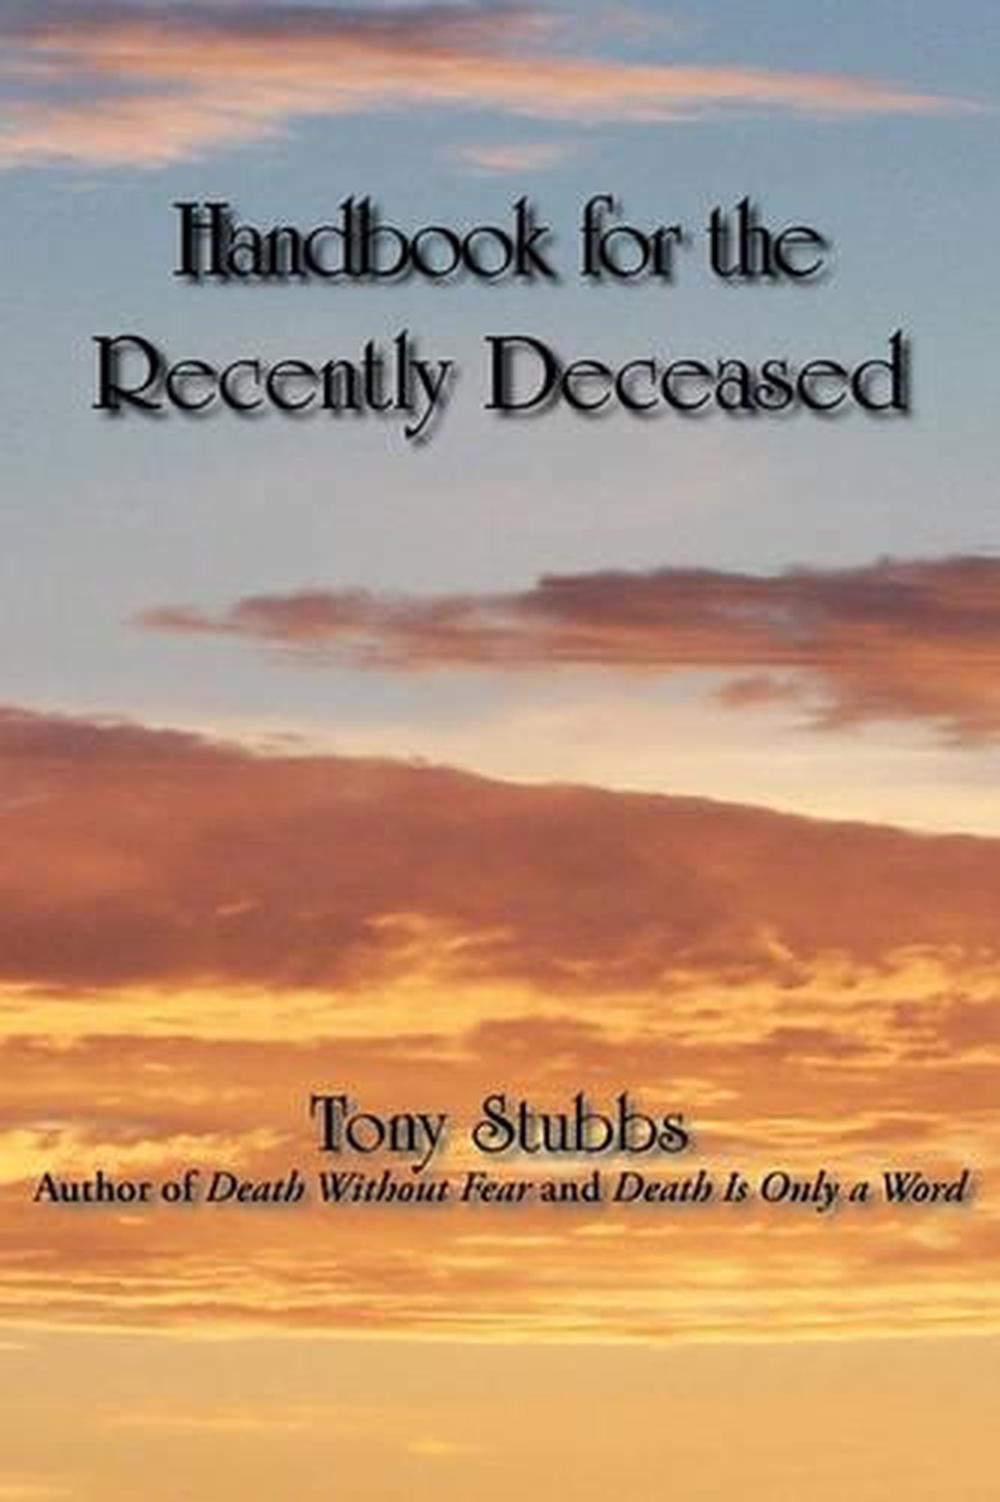 handbook-for-the-recently-deceased-by-tony-stubbs-english-paperback-book-free-ebay